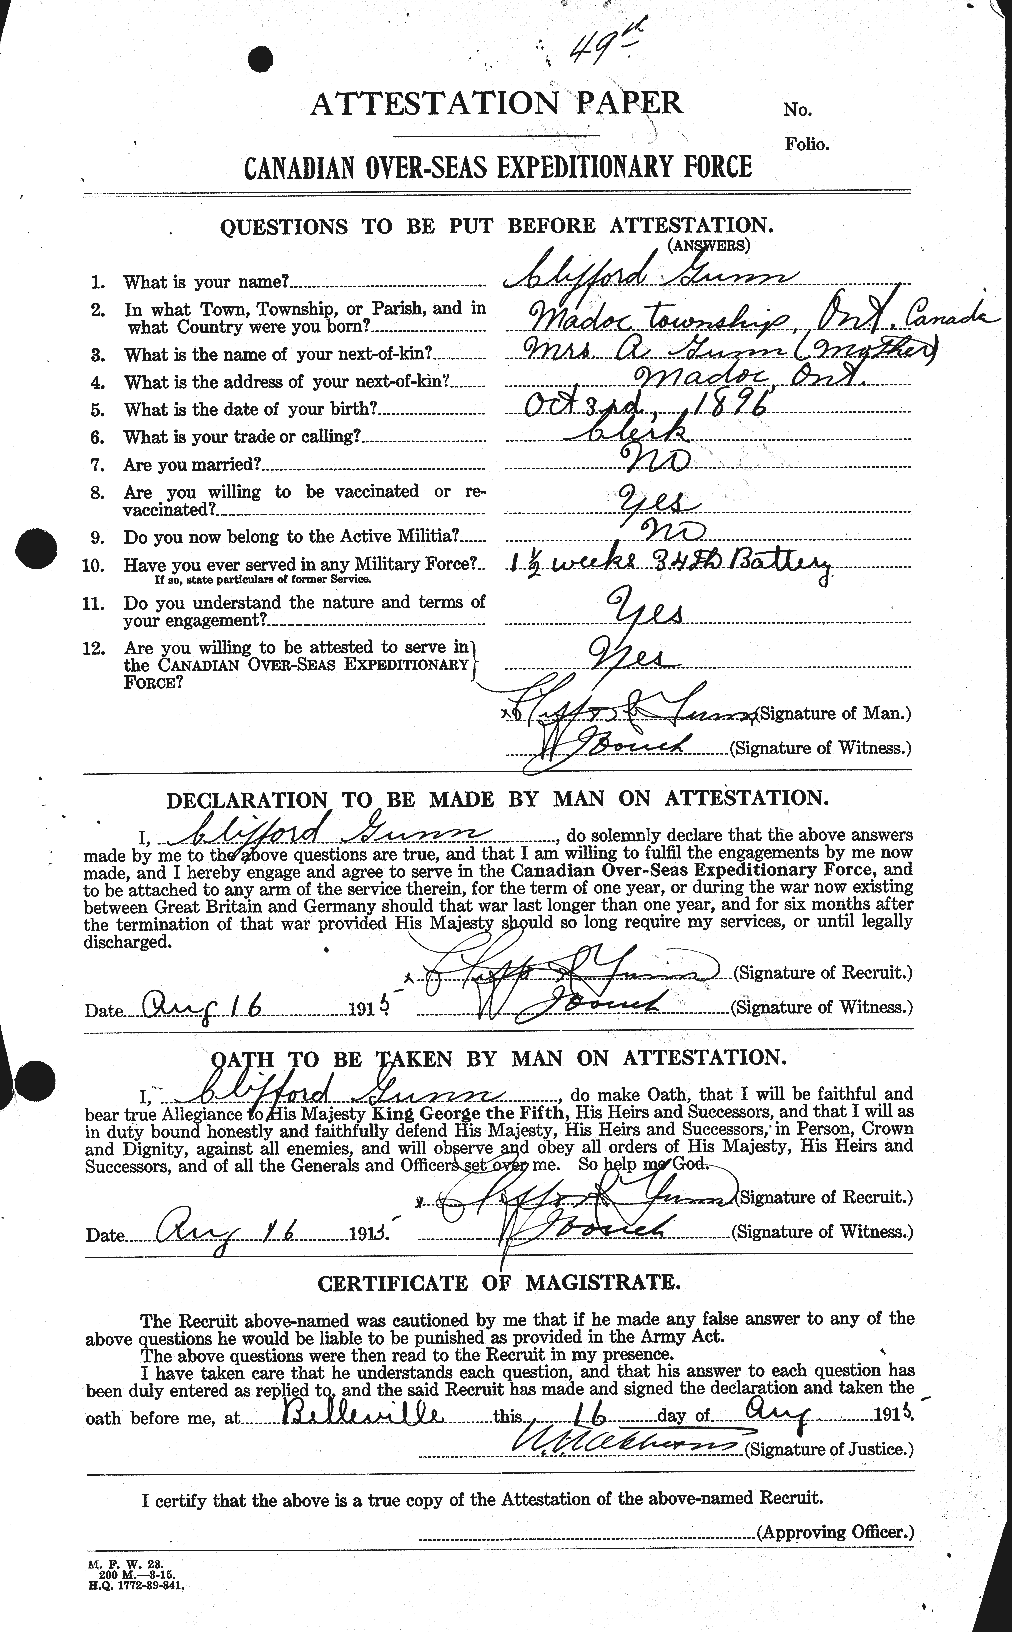 Personnel Records of the First World War - CEF 368011a